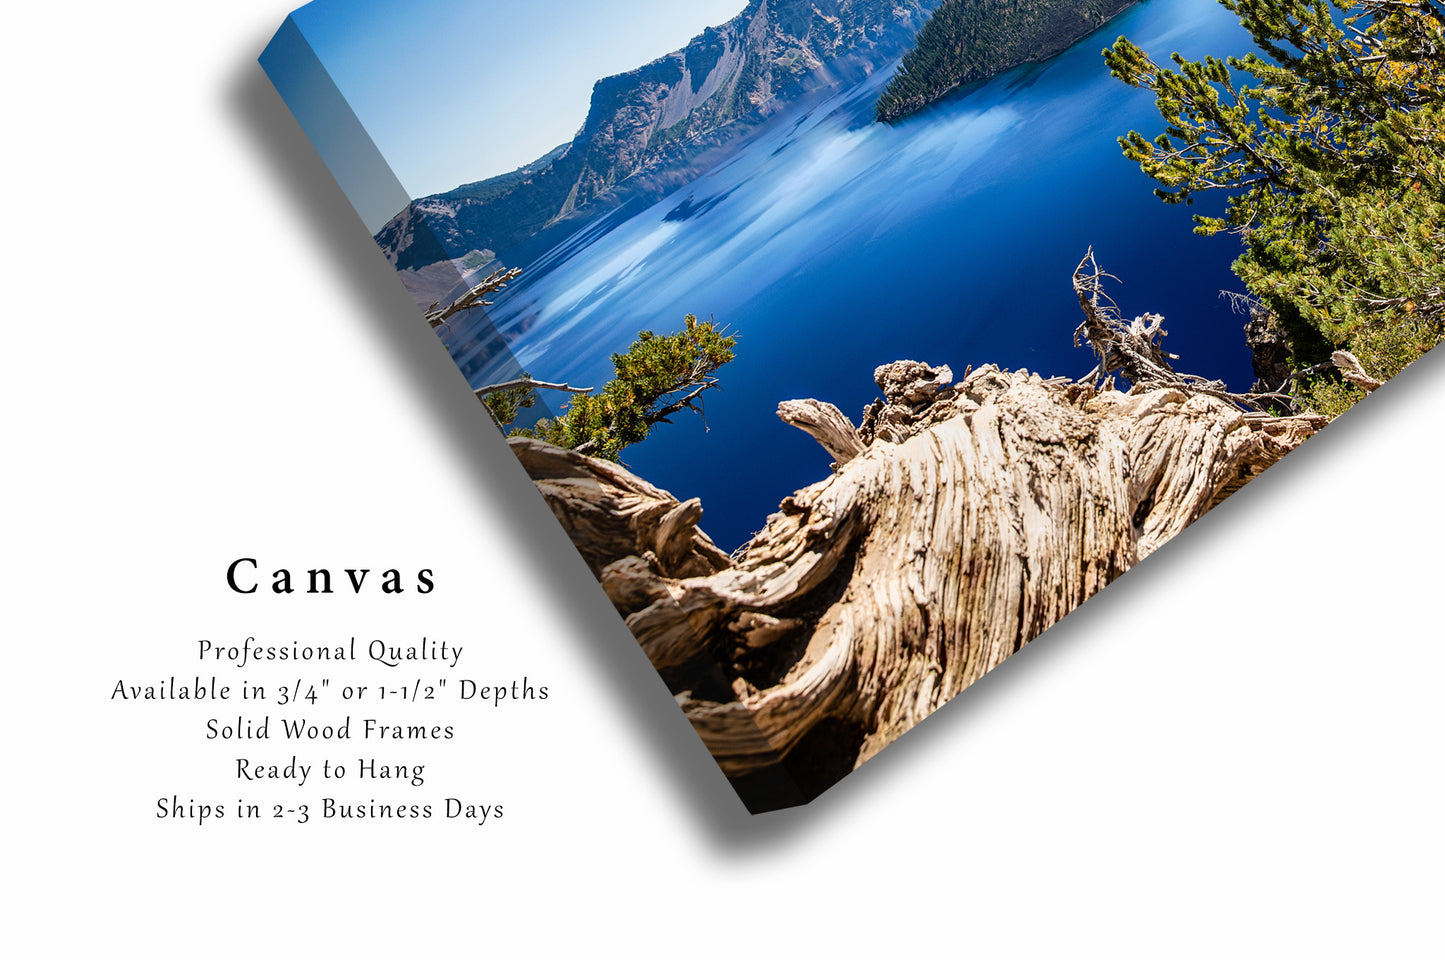 Pacific Northwest Canvas Wall Art - Gallery Wrap of Crater Lake on Summer Day in Oregon - National Park Landscape Photo Artwork Decor